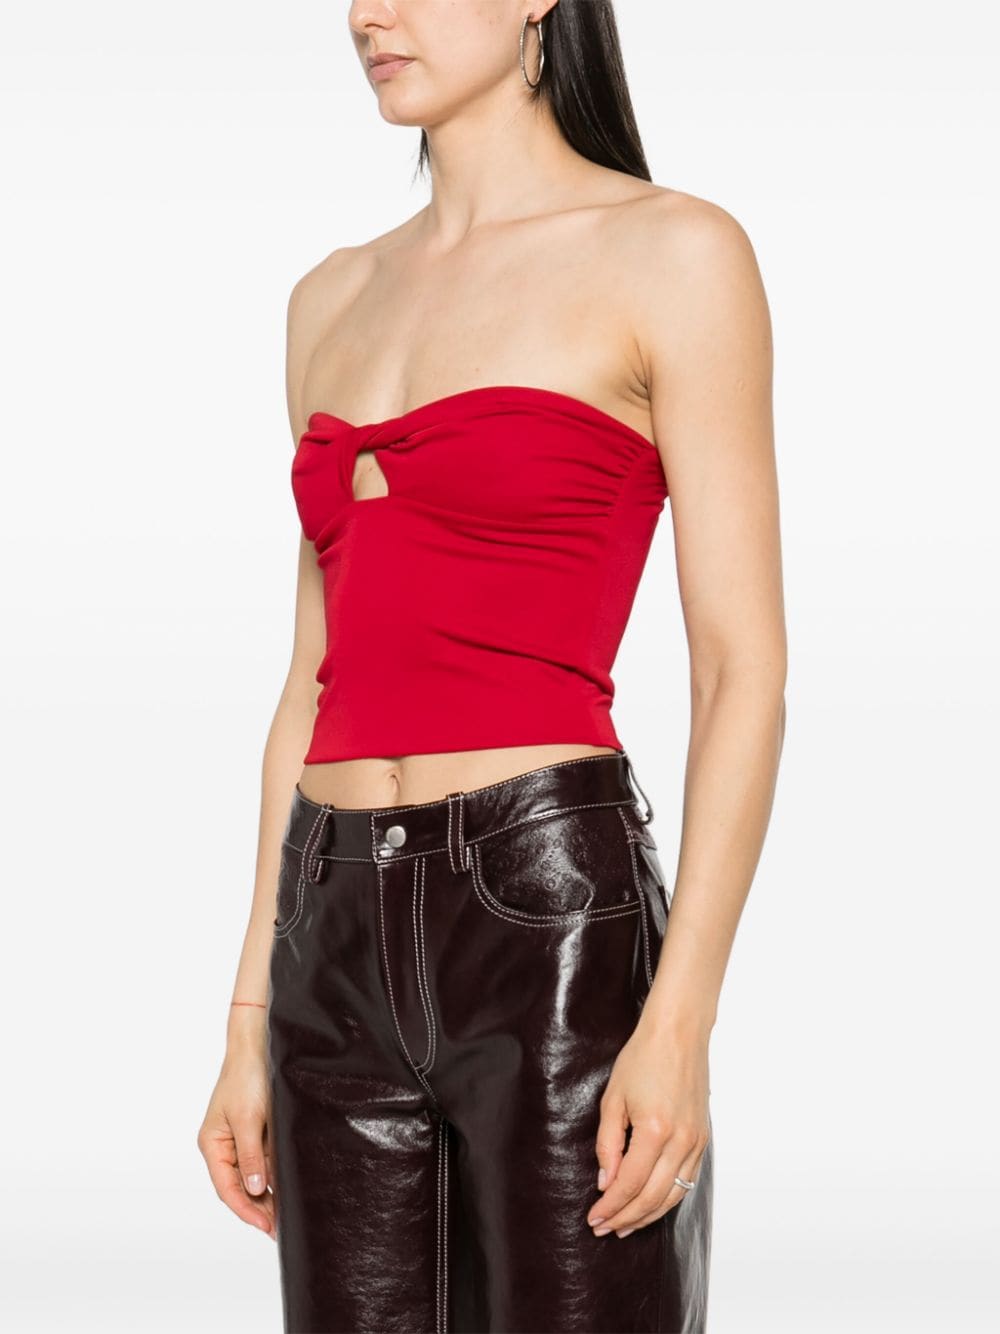 THE ANDAMANE Lucille strapless top Rood